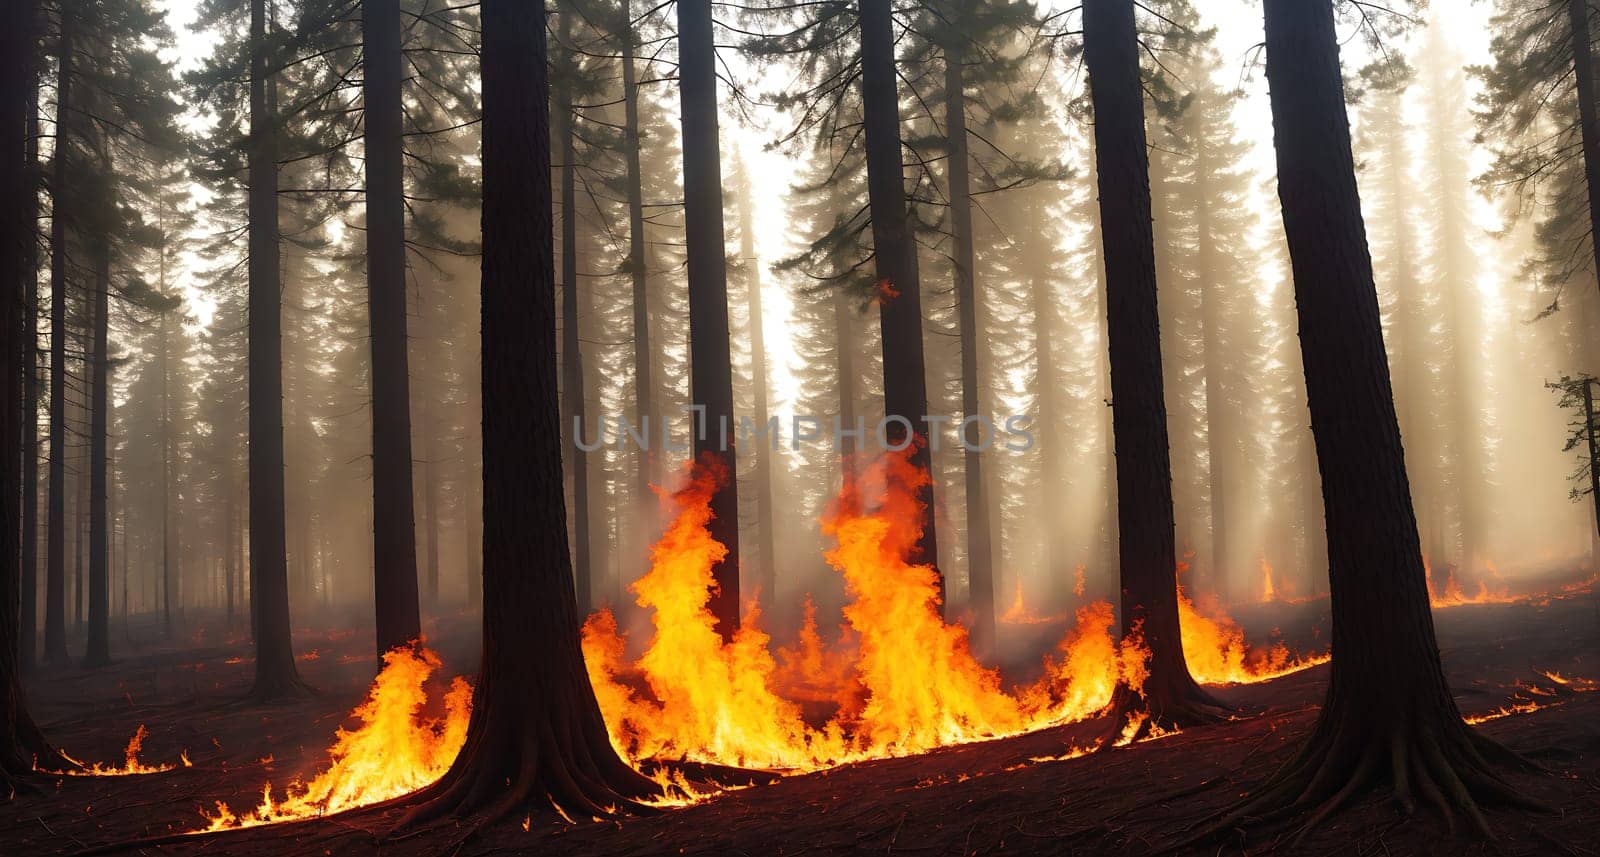 The image shows a forest with trees on fire, with flames burning in the background and smoke rising from the trees.